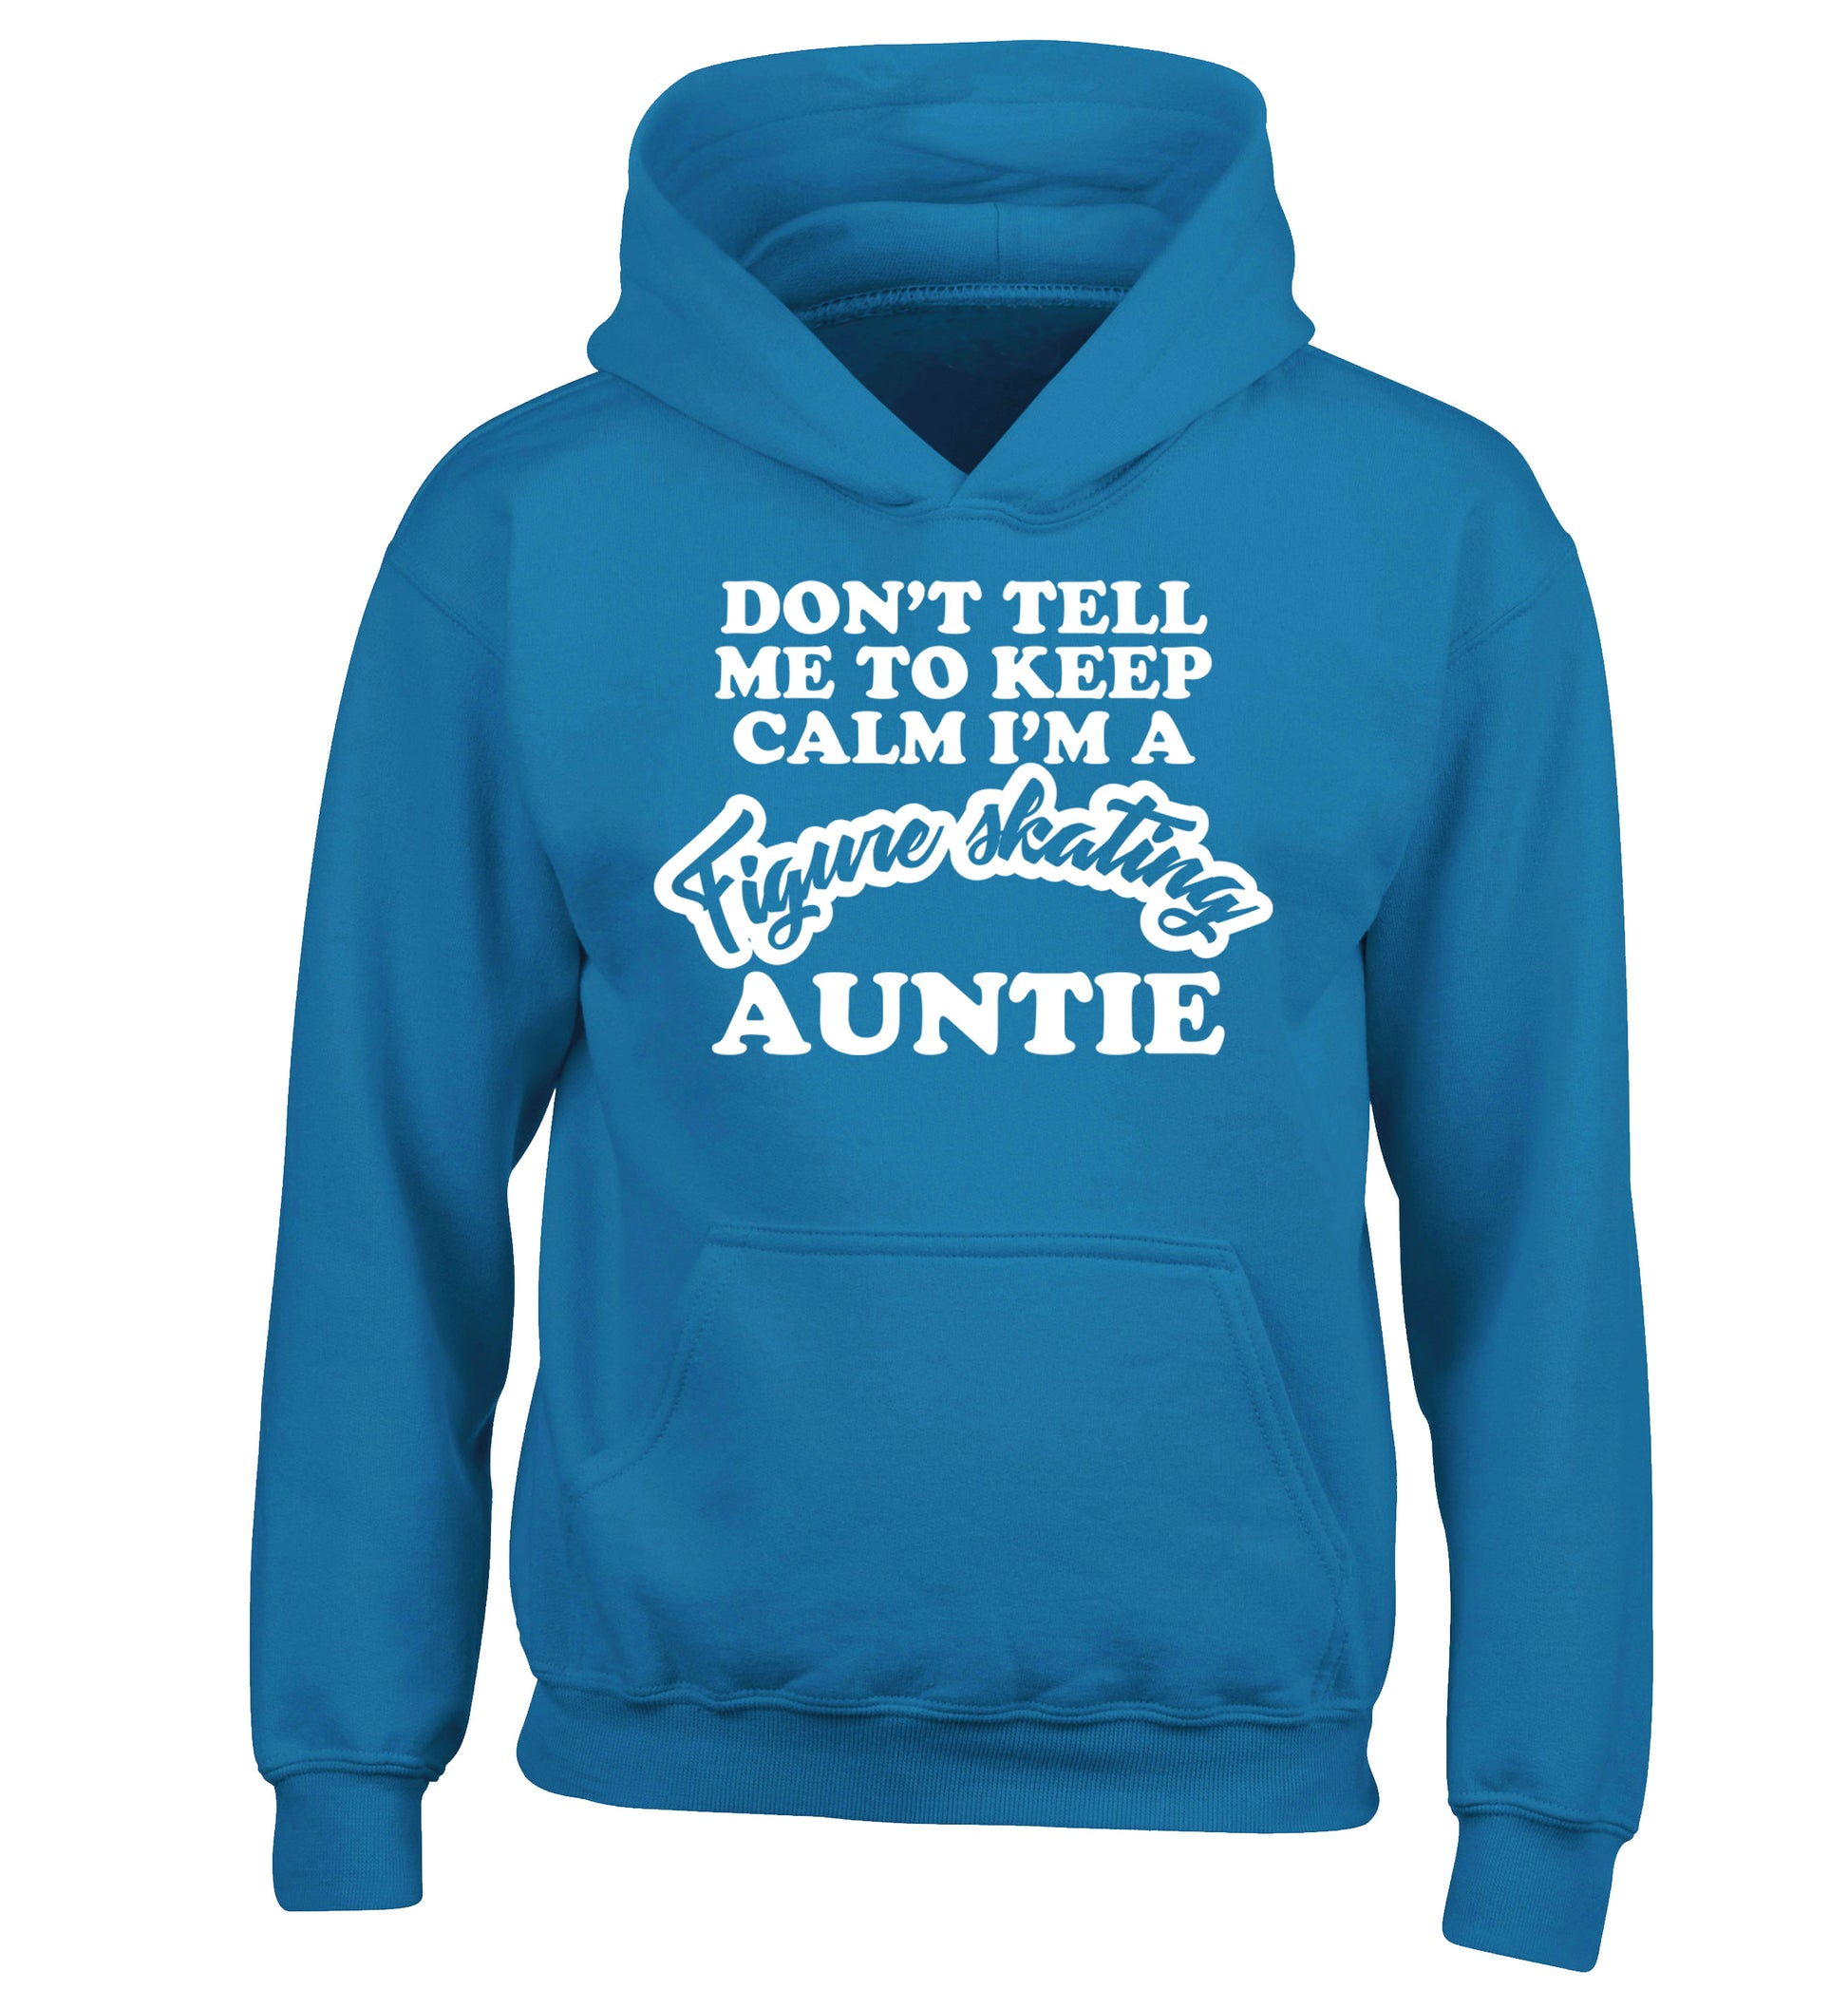 Don't tell me to keep calm I'm a figure skating auntie children's blue hoodie 12-14 Years